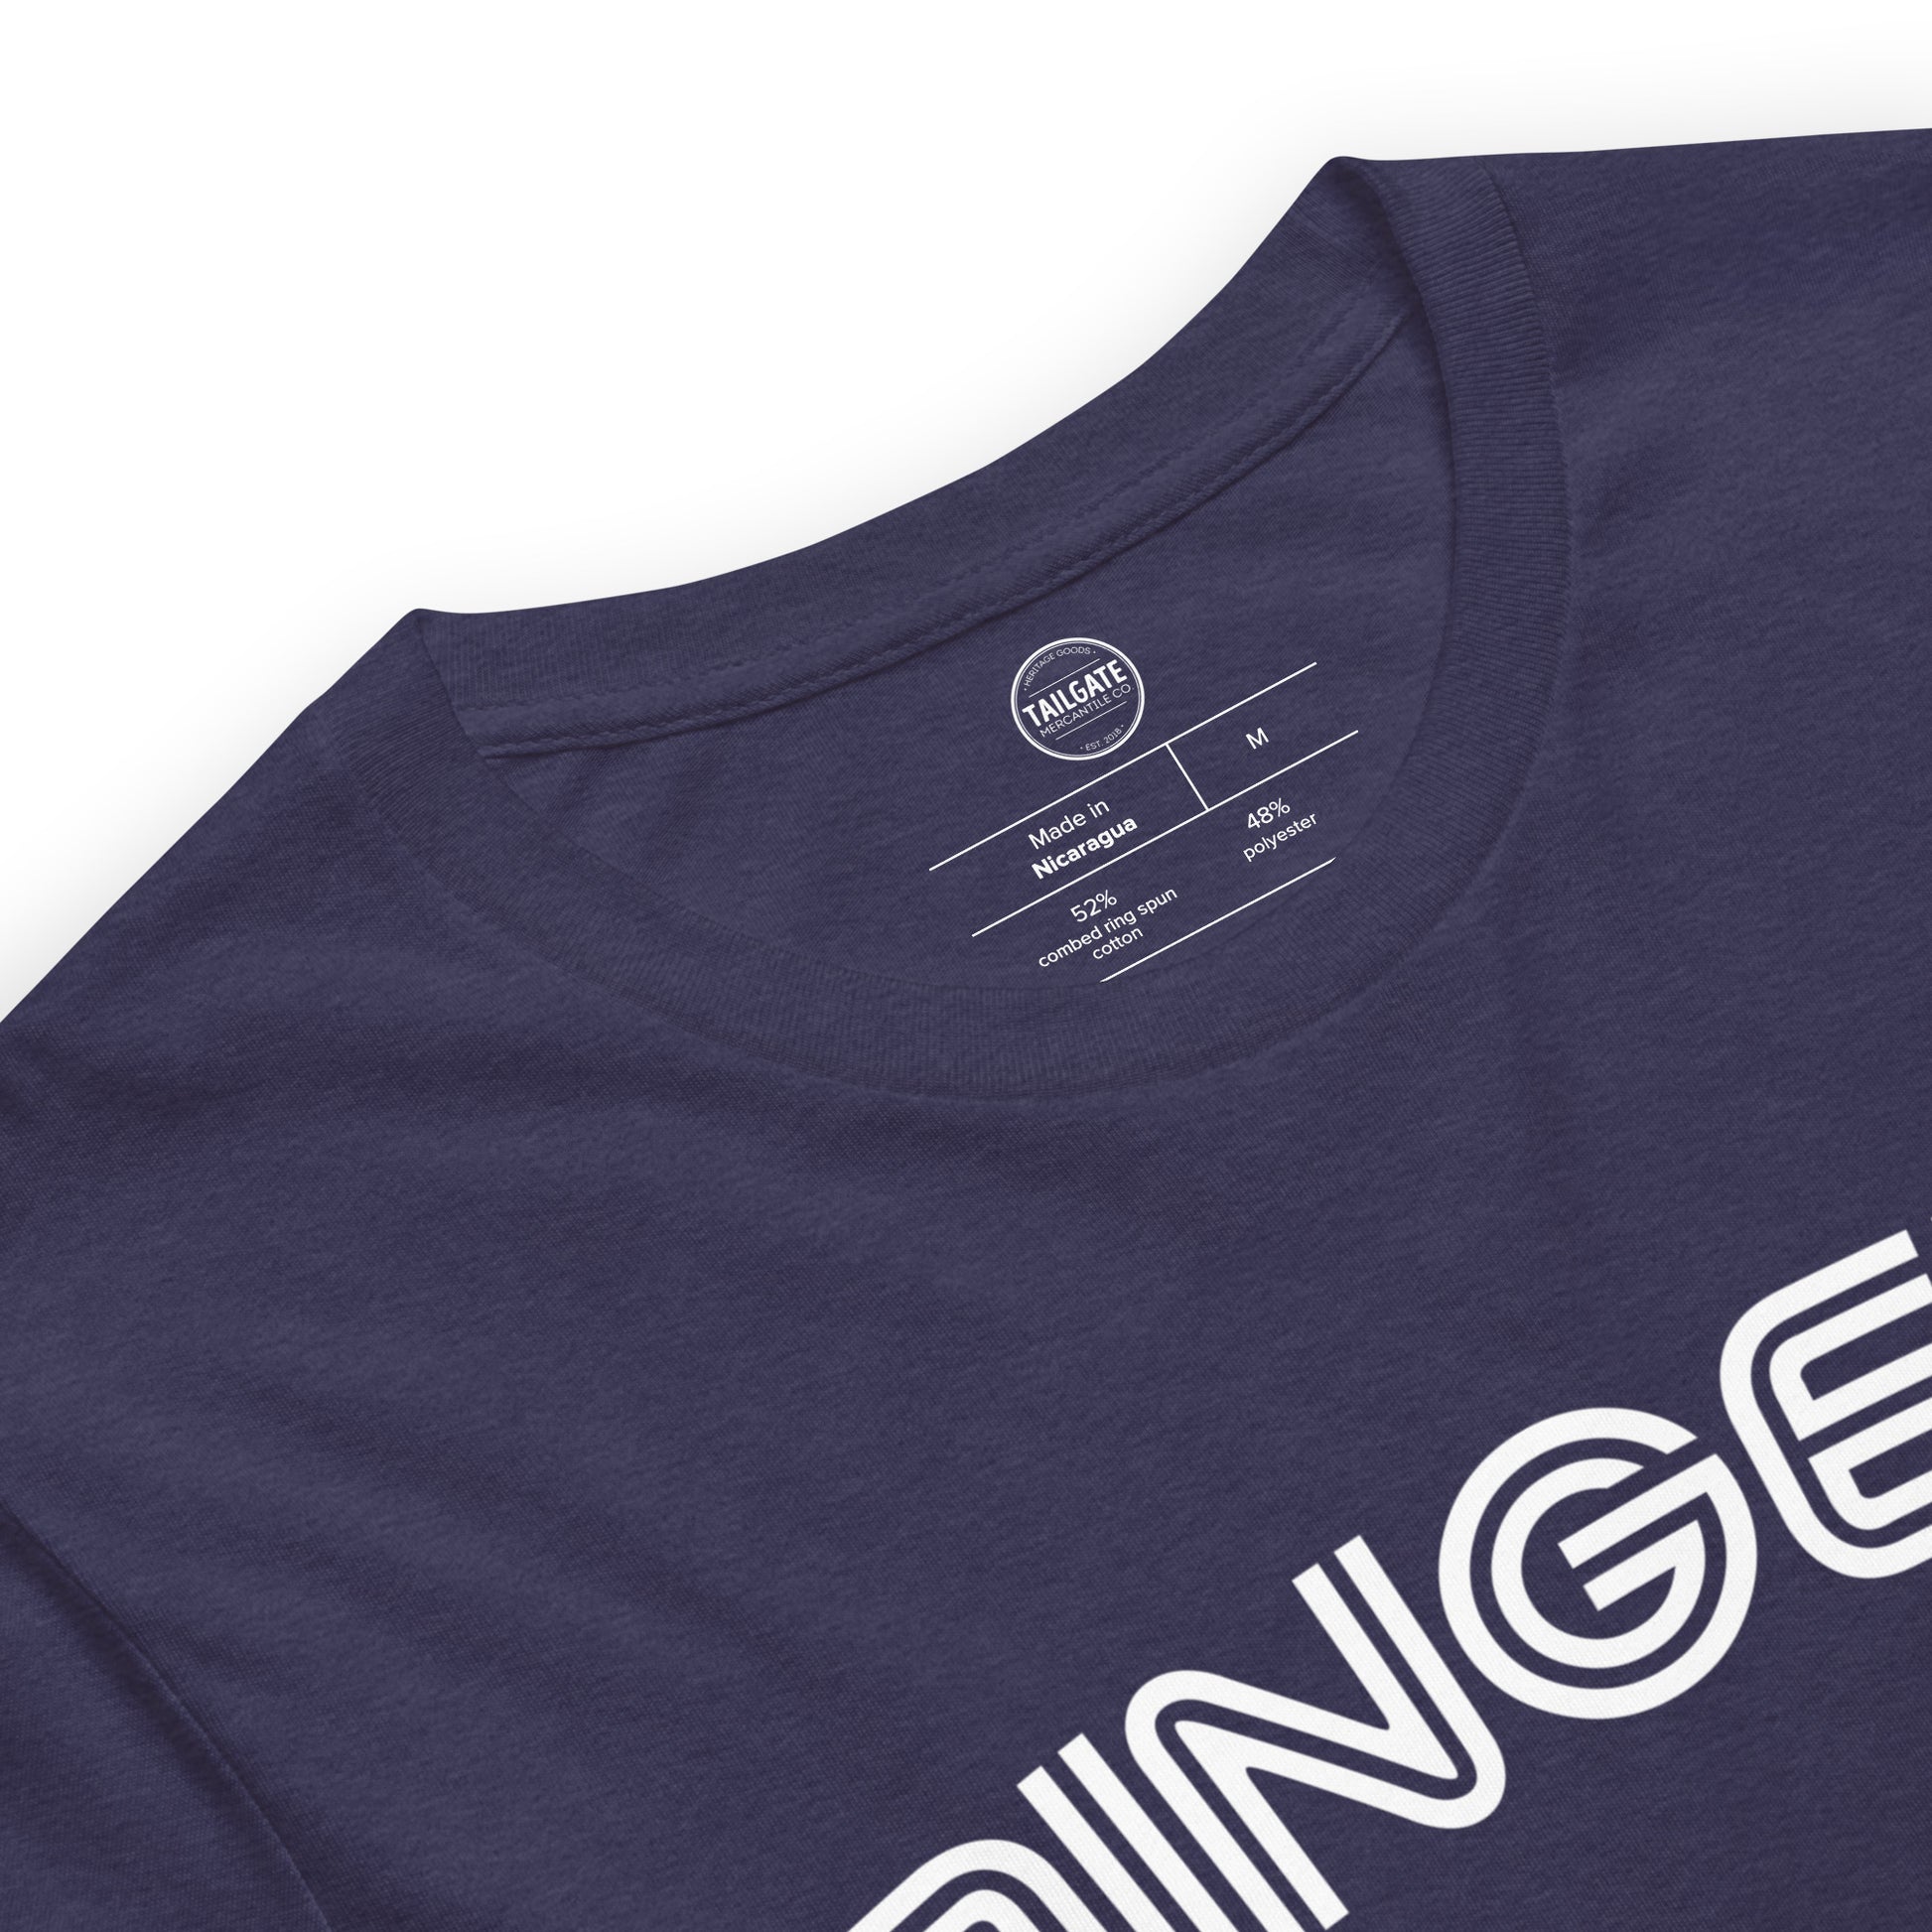 This image details the graphic design of the word "dingers" in a font similar to the Toronto Blue Jays. The font is in white and the tee is navy blue and is close up of the inside printed tag. This design is exclusive to tailgate mercantile and available only online.